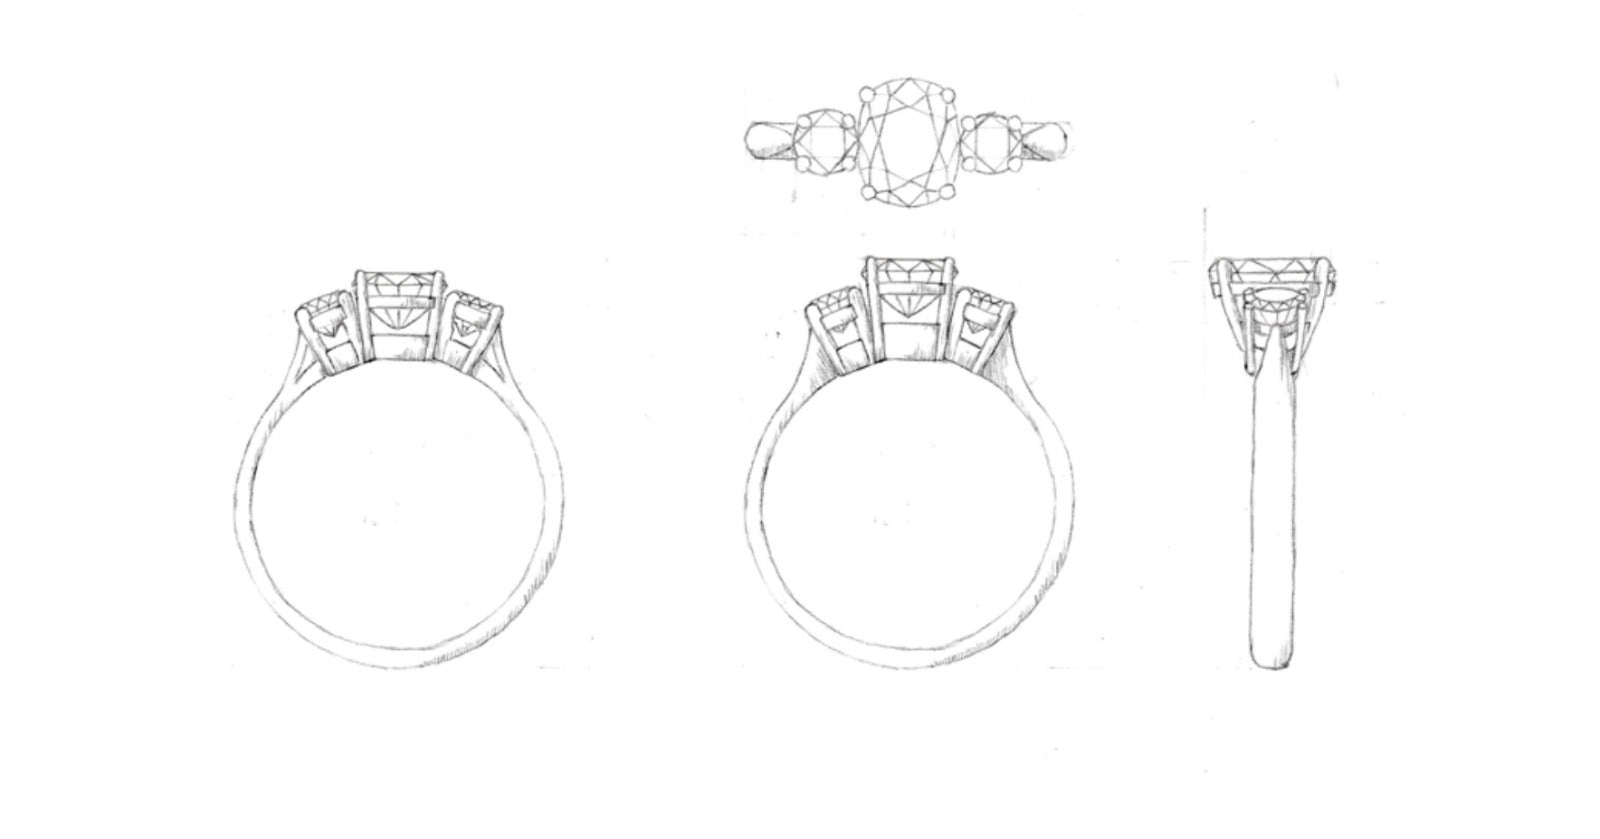 Sketch of bespoke trilogy diamond ring with two different side options.